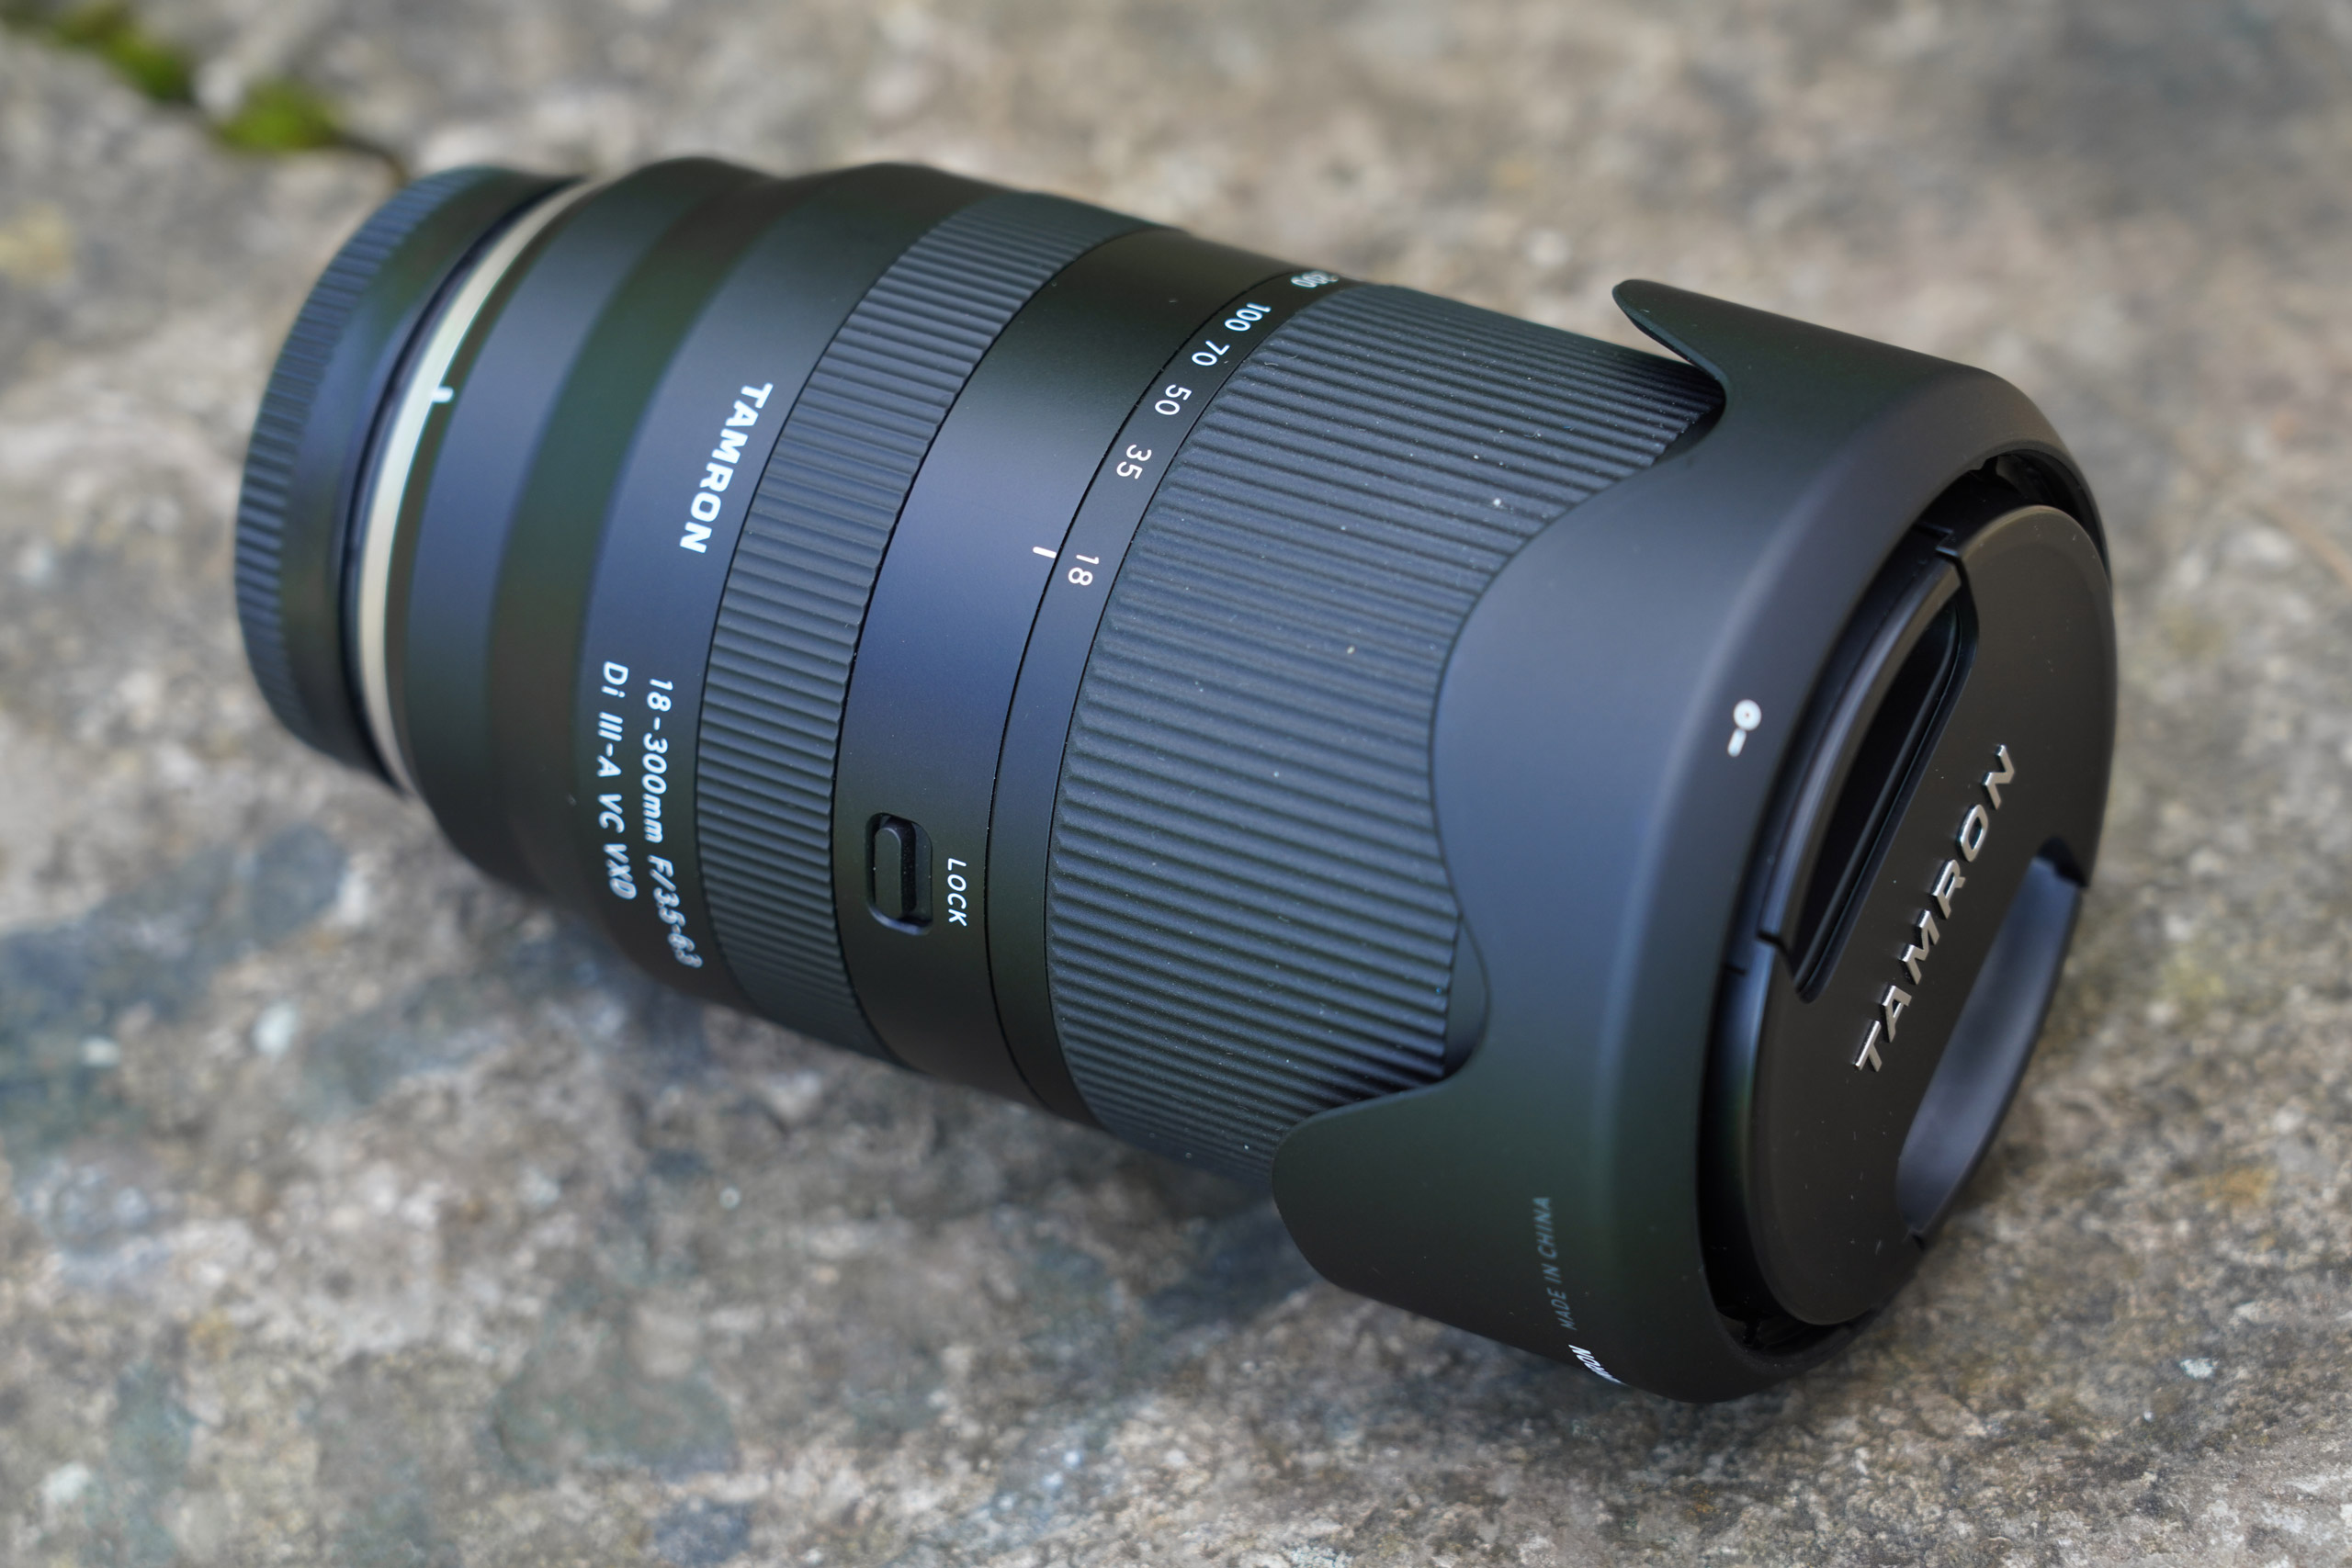 Tamron 18-300mm F/3.5-6.3 Di III-A VC lens with hood and lens cap